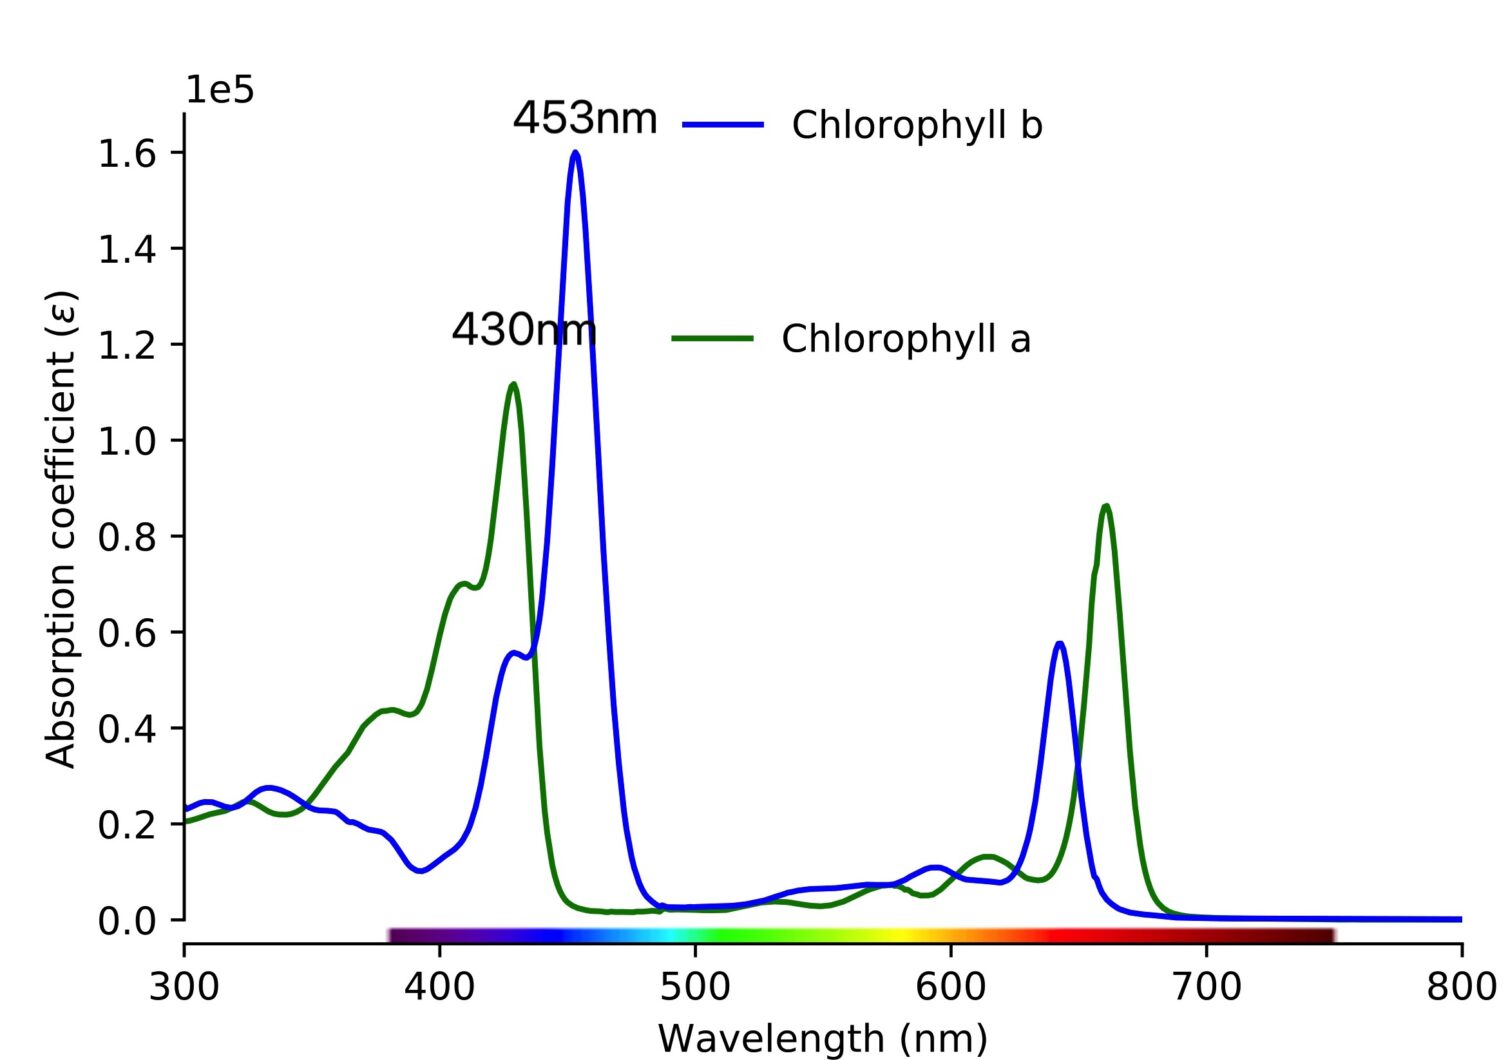 Chlorophyll a has approximate absorbance maxima of 430 nm